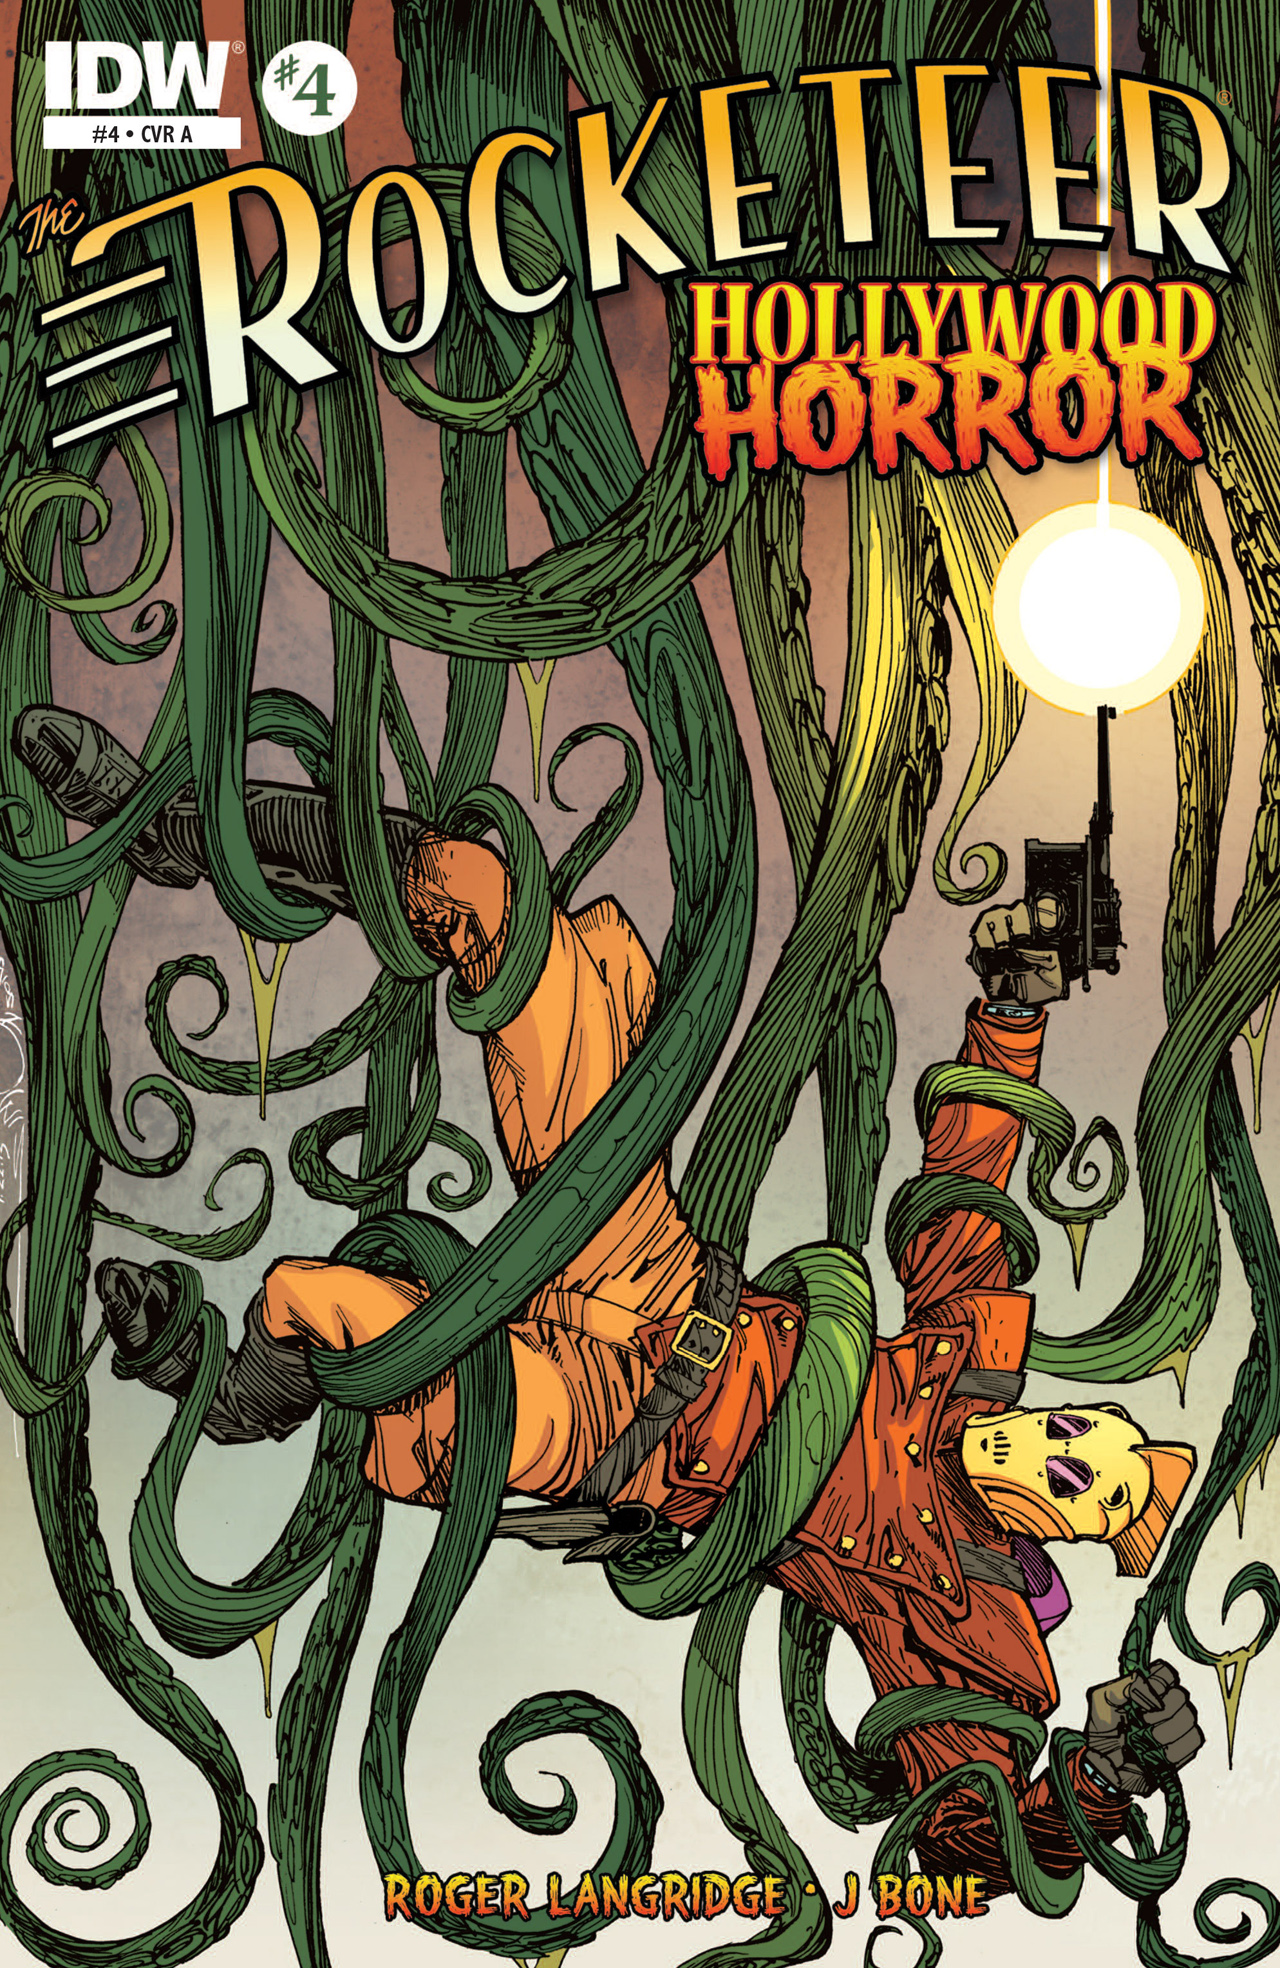 Read online The Rocketeer: Hollywood Horror comic -  Issue #4 - 1